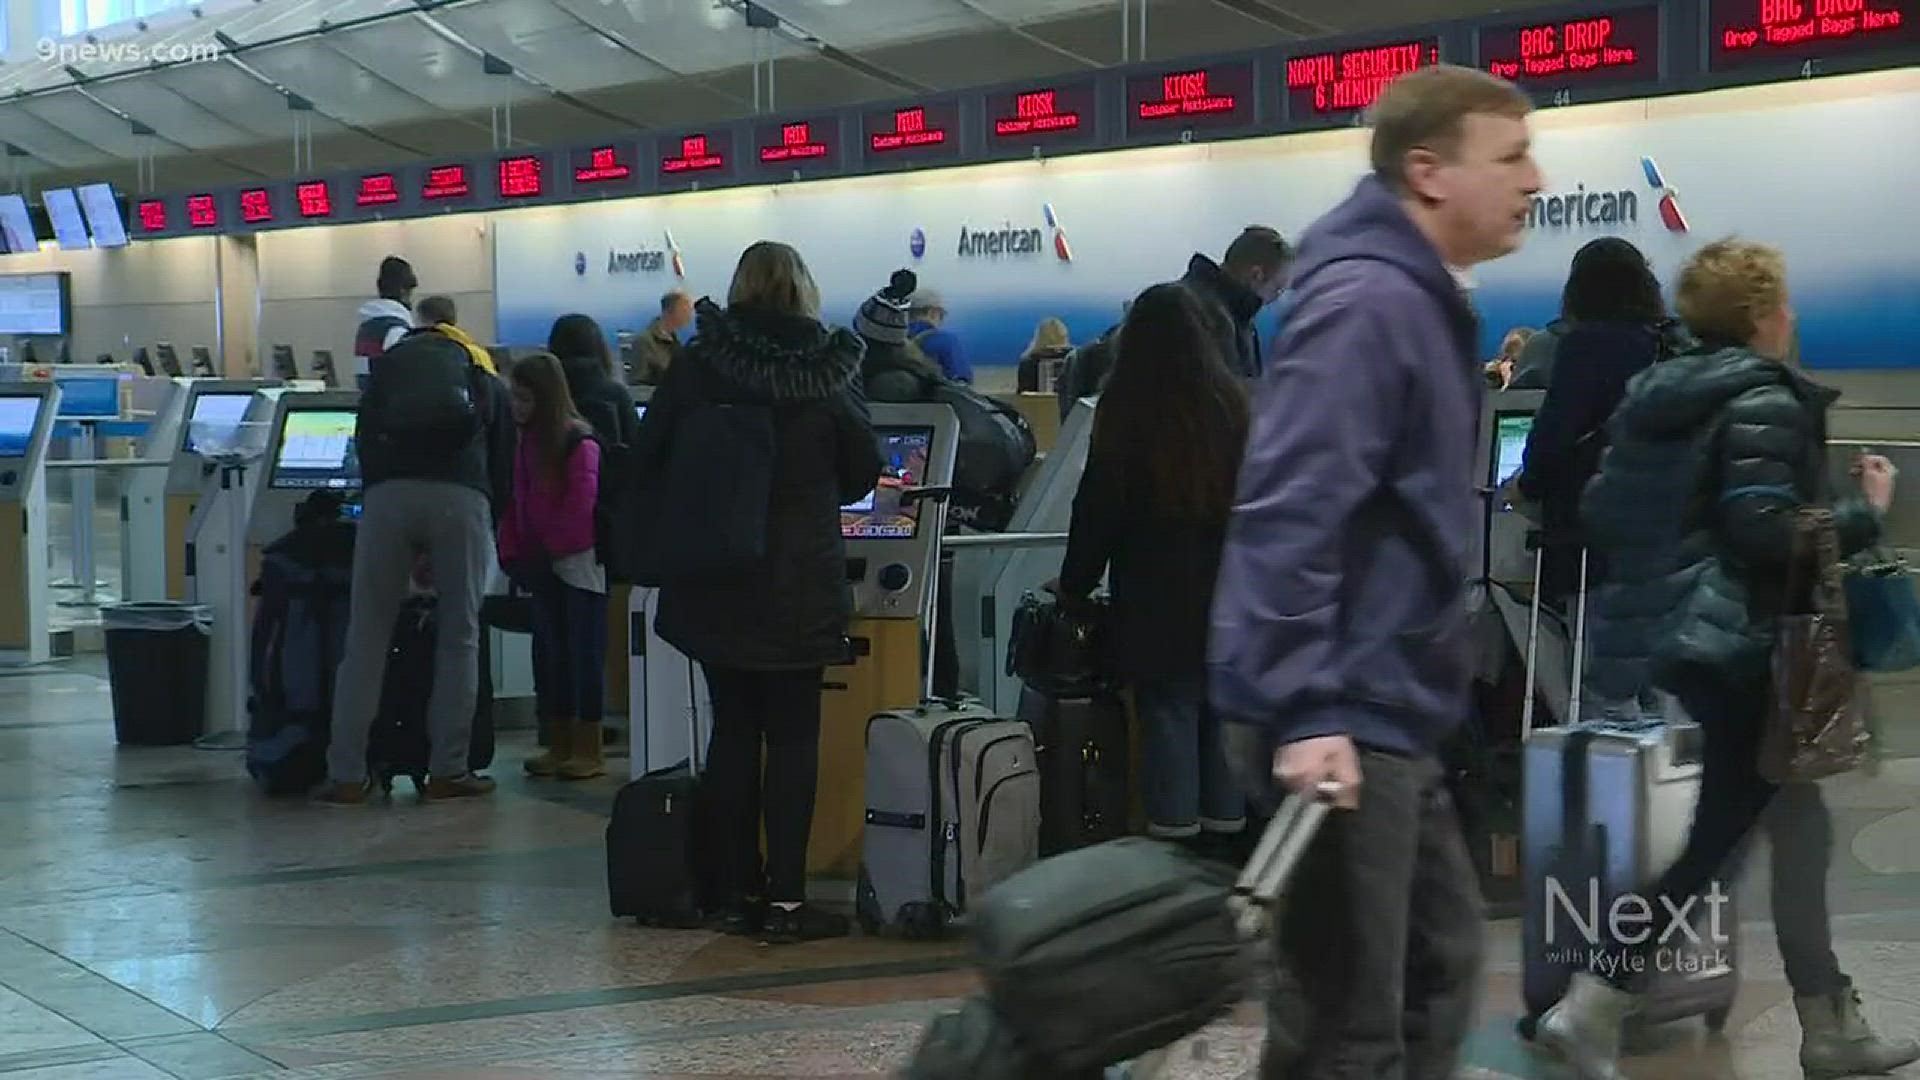 Other airlines called off flights sooner, according to tracking data. Thursday, those carriers had much shorter lines at DIA.